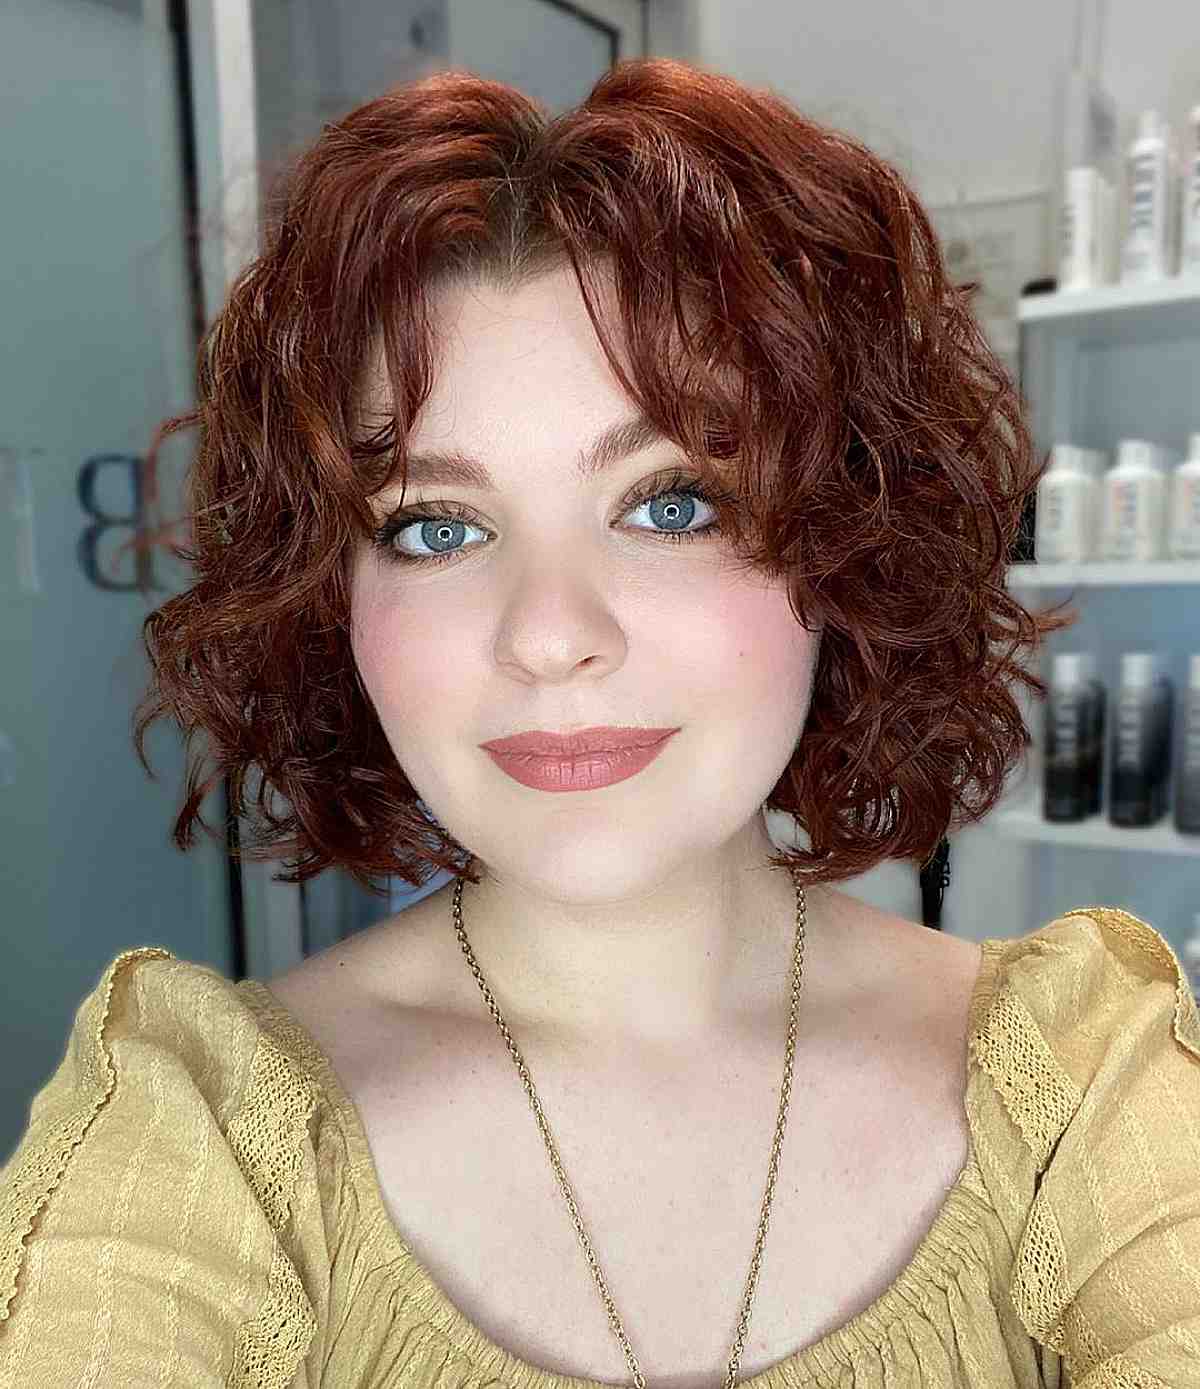 Textured Middle Part Short Bobbed Hair with Natural Curls